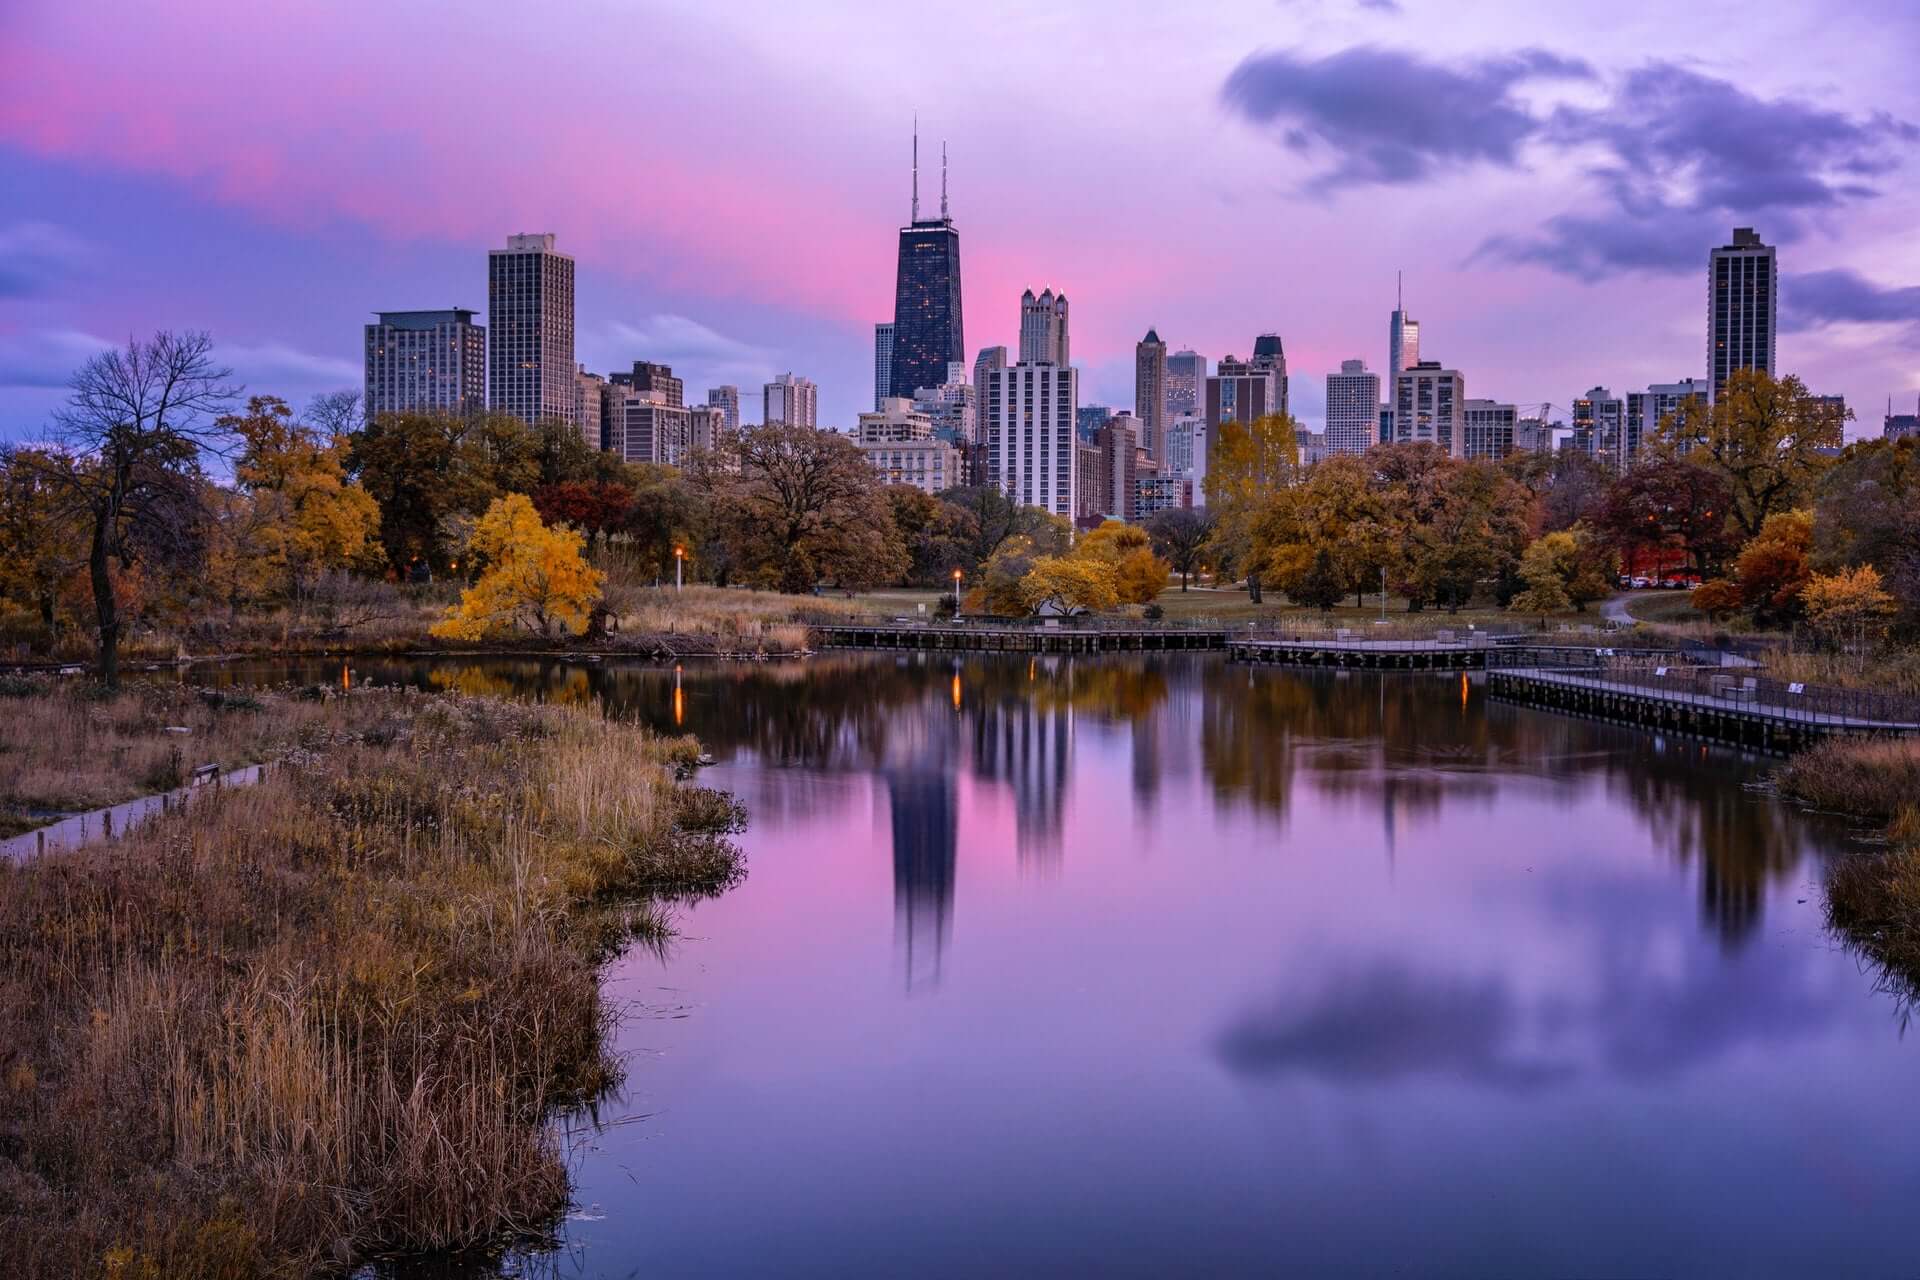 A purple-tinted view of the Chicago skyline from across a large pond.